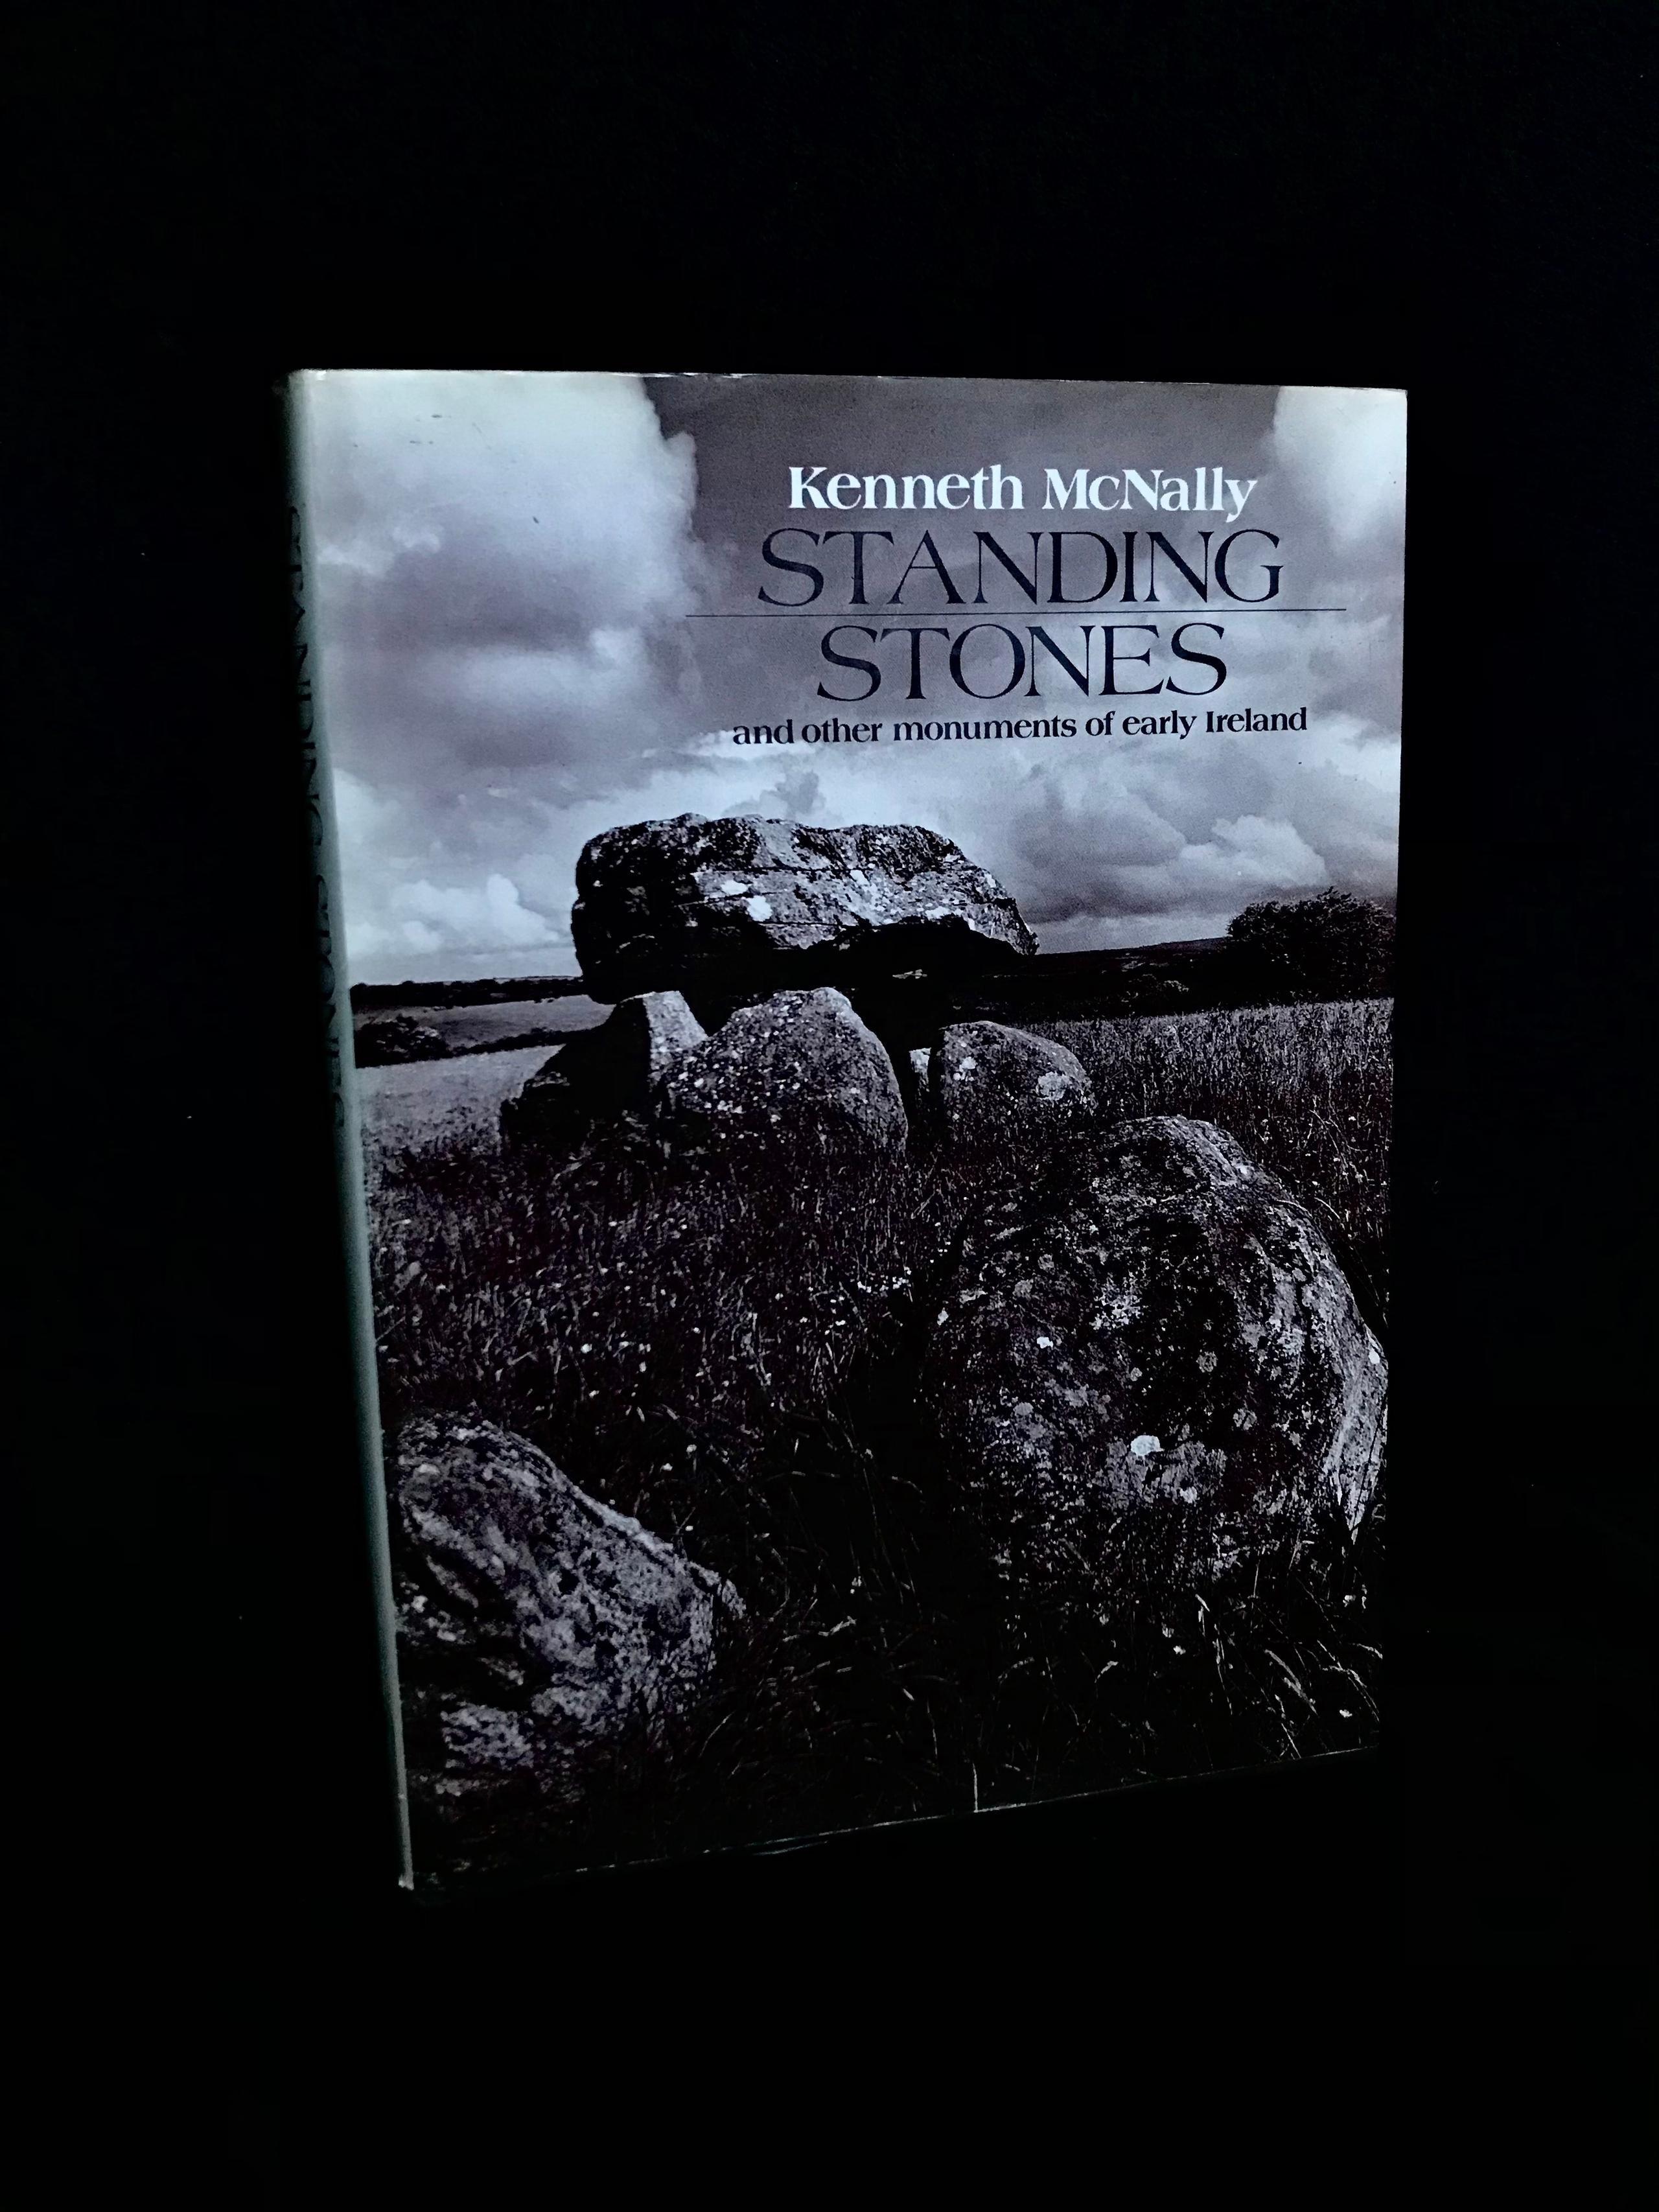 Standing Stones and Other Monuments of Early Ireland by Kenneth McNally